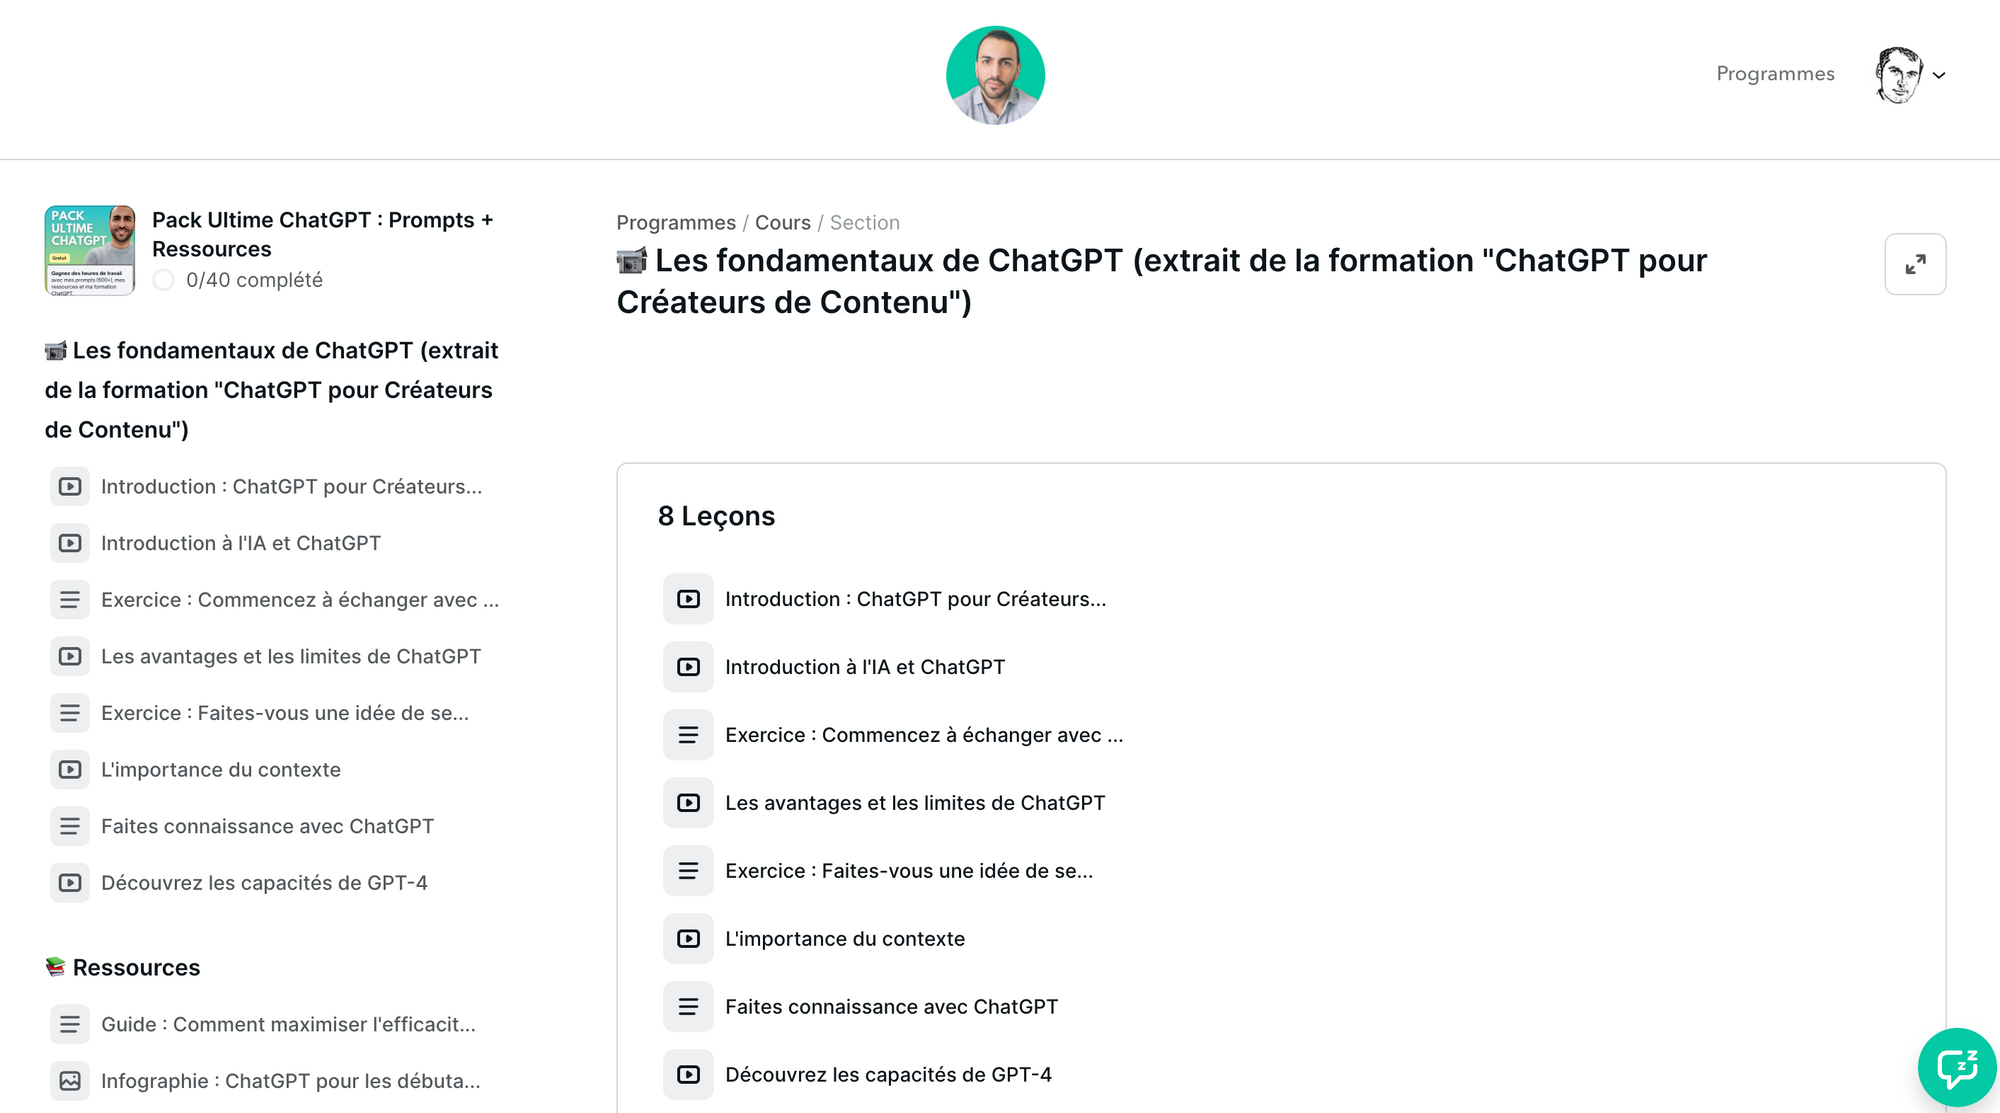 Le Pack Ultime ChatGPT : Prompts + Ressources